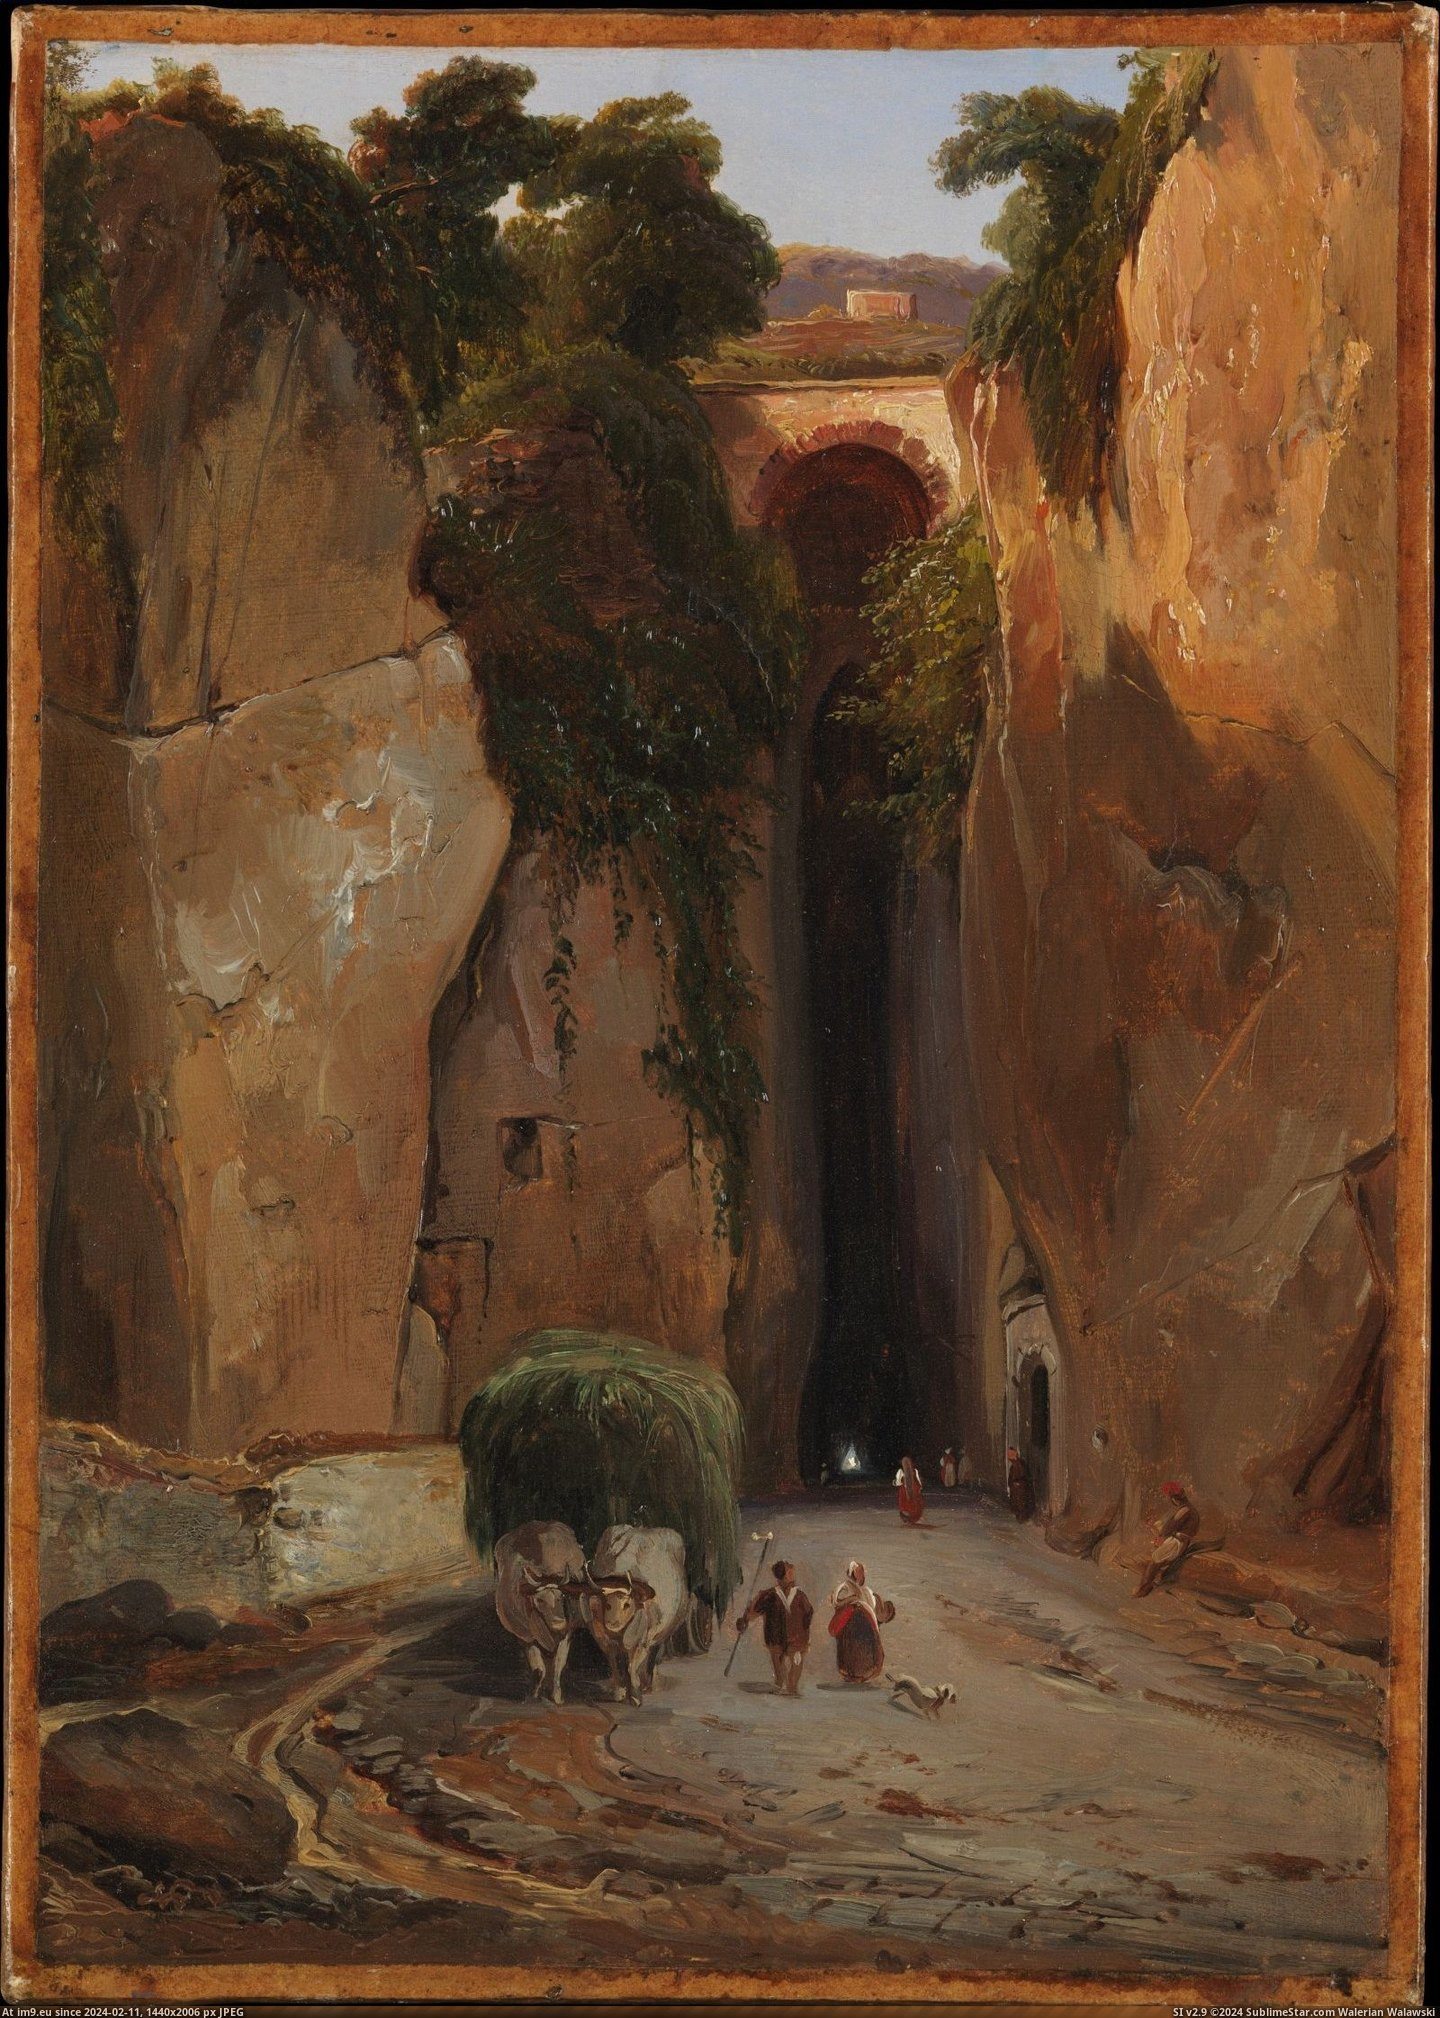 Charles Rémond - Entrance to the Grotto of Posilipo (prob. ca. 1821-25) (in Metropolitan Museum Of Art - European Paintings)